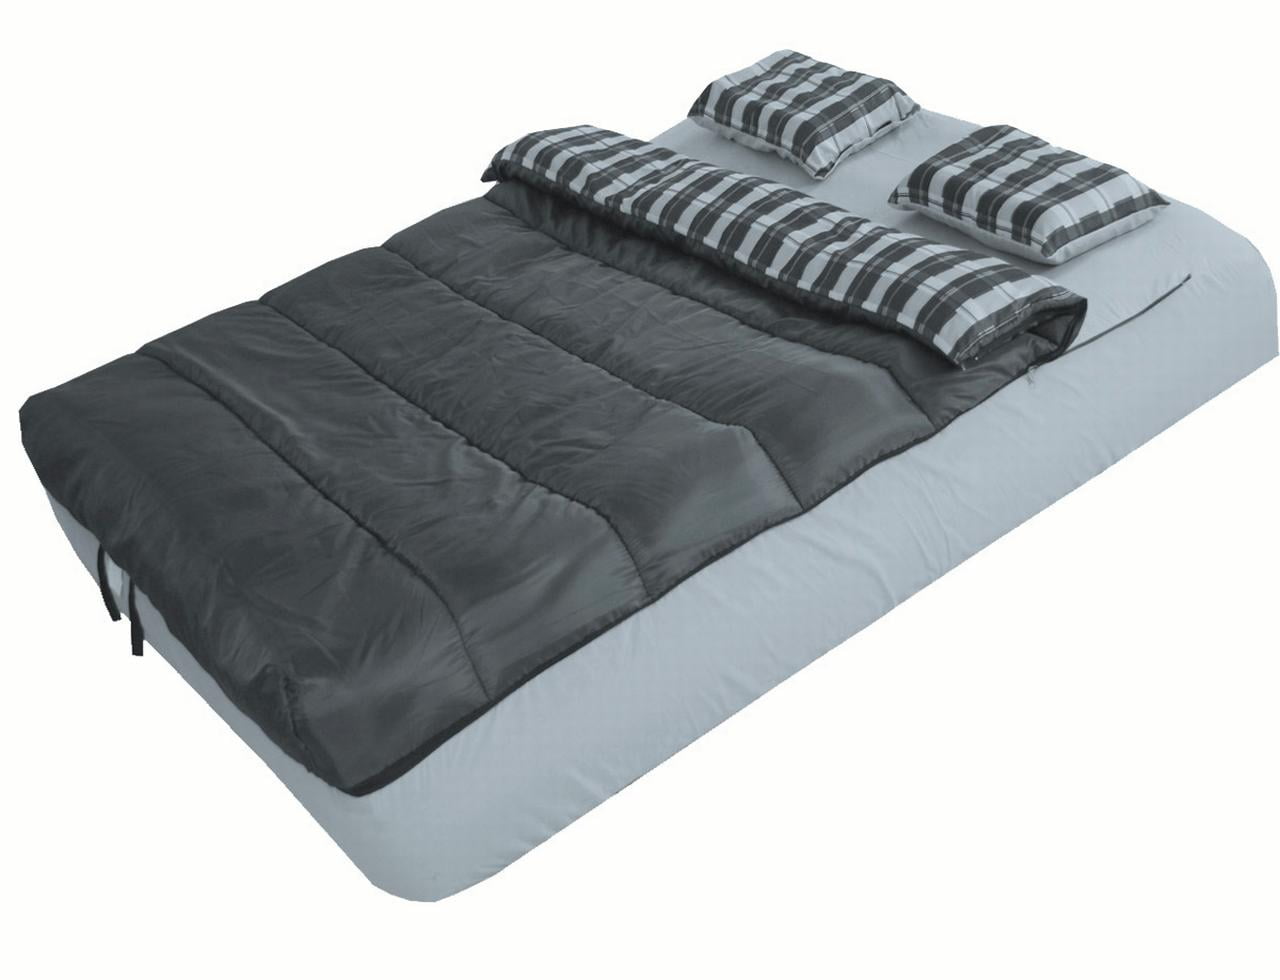 Insta Bed 6 Piece Gray Bedding Set For, Air Bed Sheets Twin